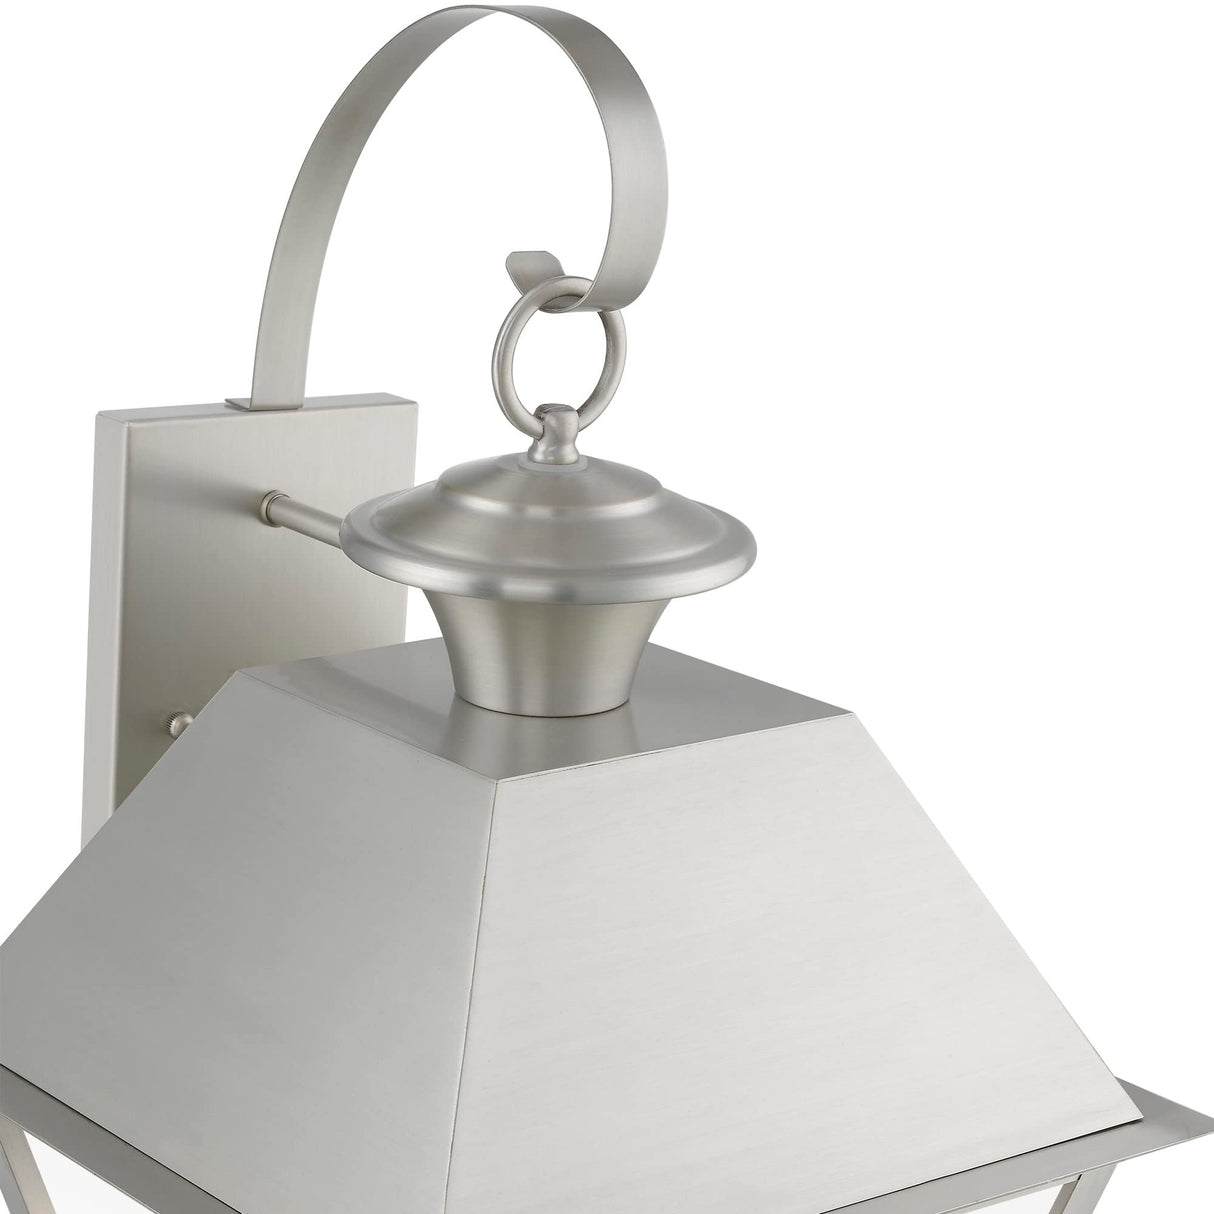 Livex Lighting 27218-91 Wentworth 3 Light 22 inch Brushed Nickel Outdoor Wall Lantern, Large